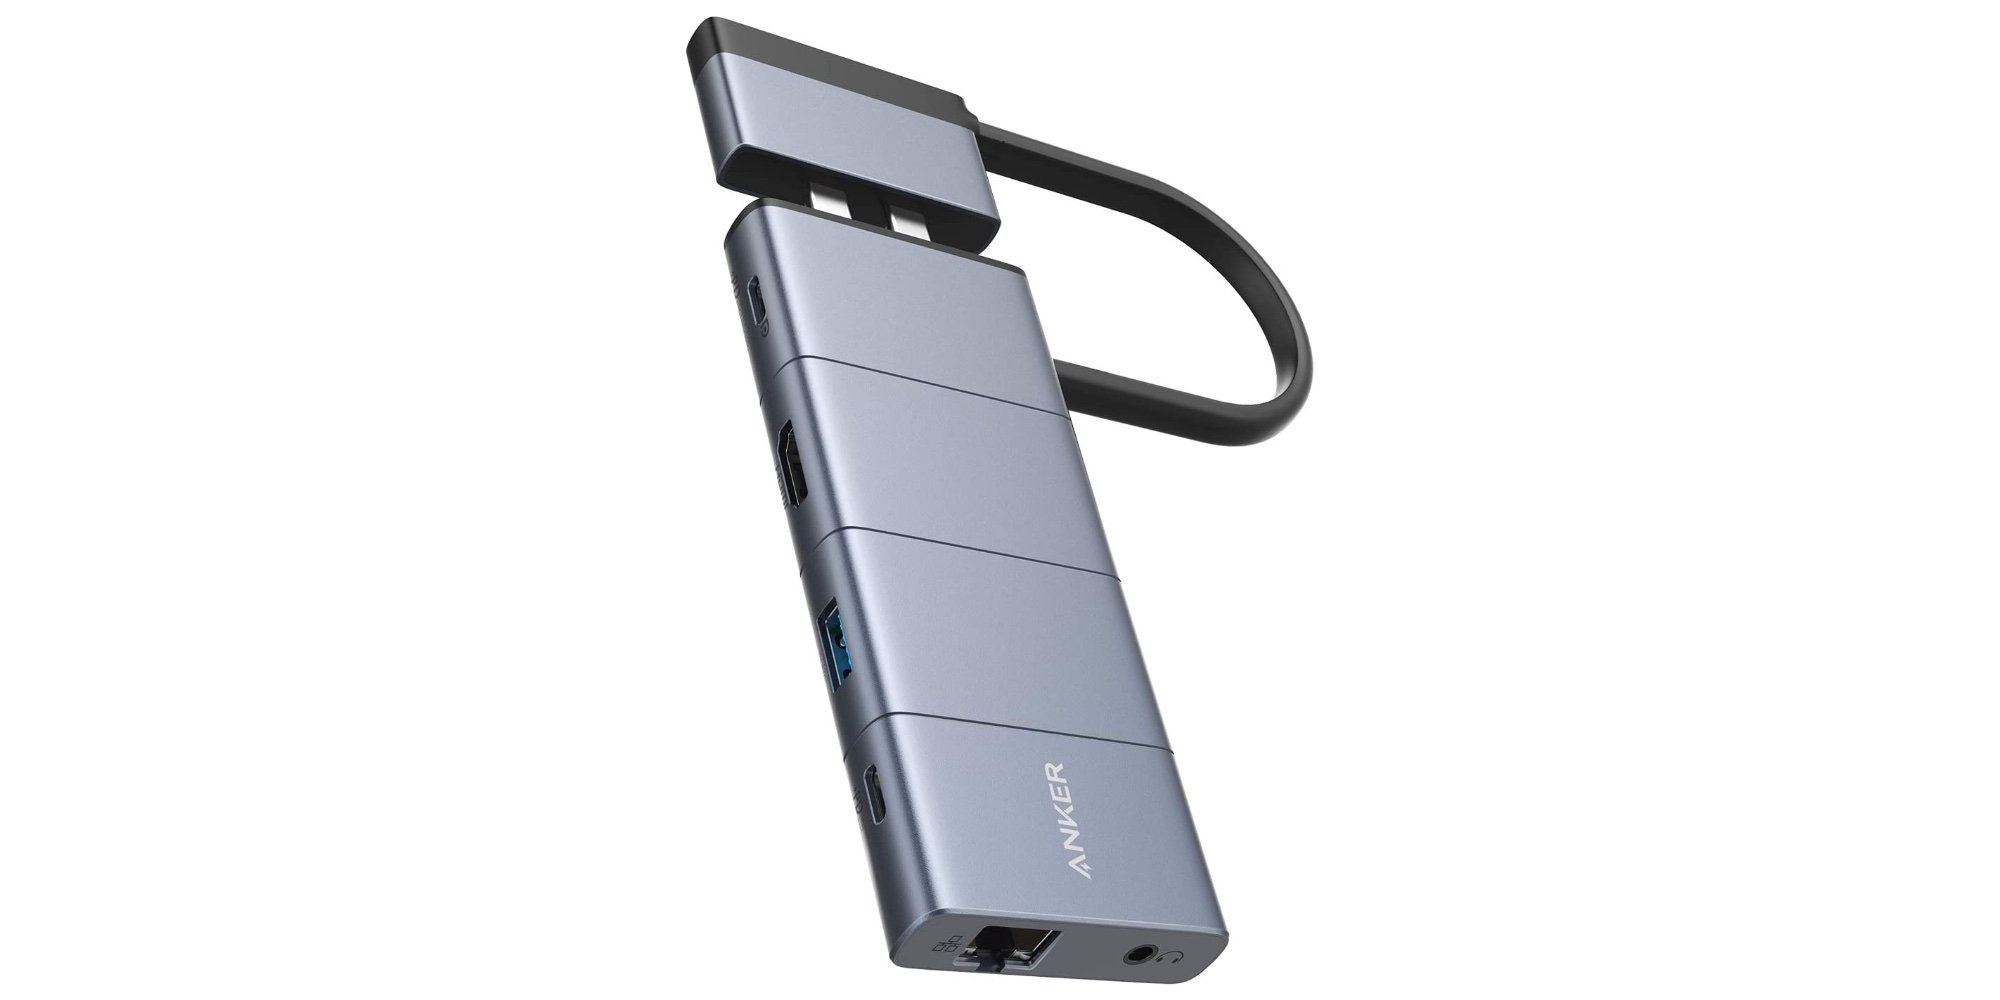 Anker PowerExpand USB-C Hub debuts with 9-in-2 design - 9to5Toys